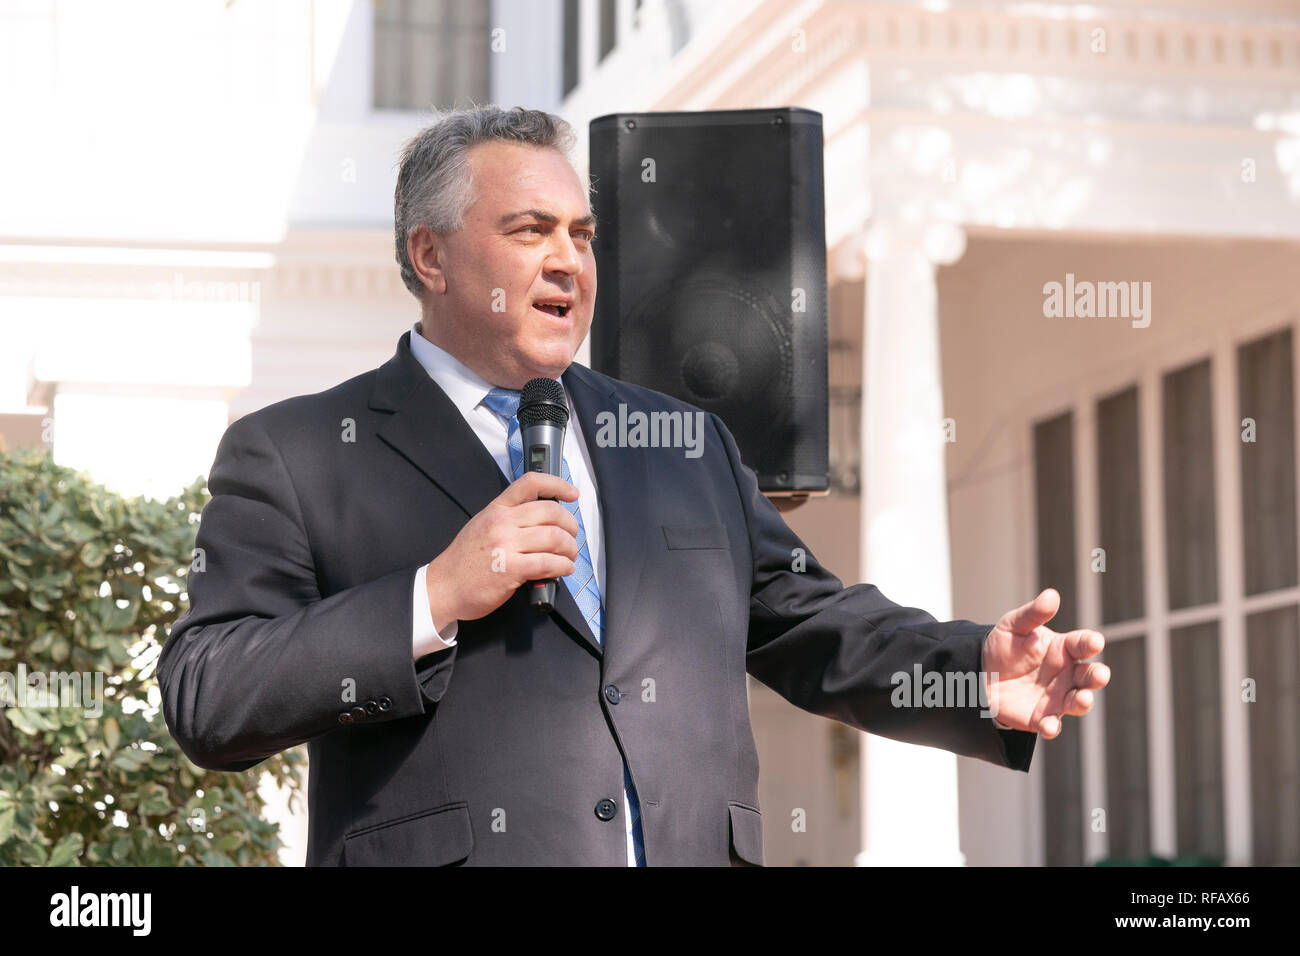 Ambassador Joe Hockey of Australia speaks to guests during the Great Mates Australia-Texas Barbecue at the Texas Governor's Mansion in Austin, TX. Abbott and Hockey worked to strengthen ties between the allies, discussing agriculture and high tech before eating Australian Vegemite burnt ends and HeartBrand Akaushi beef. Stock Photo